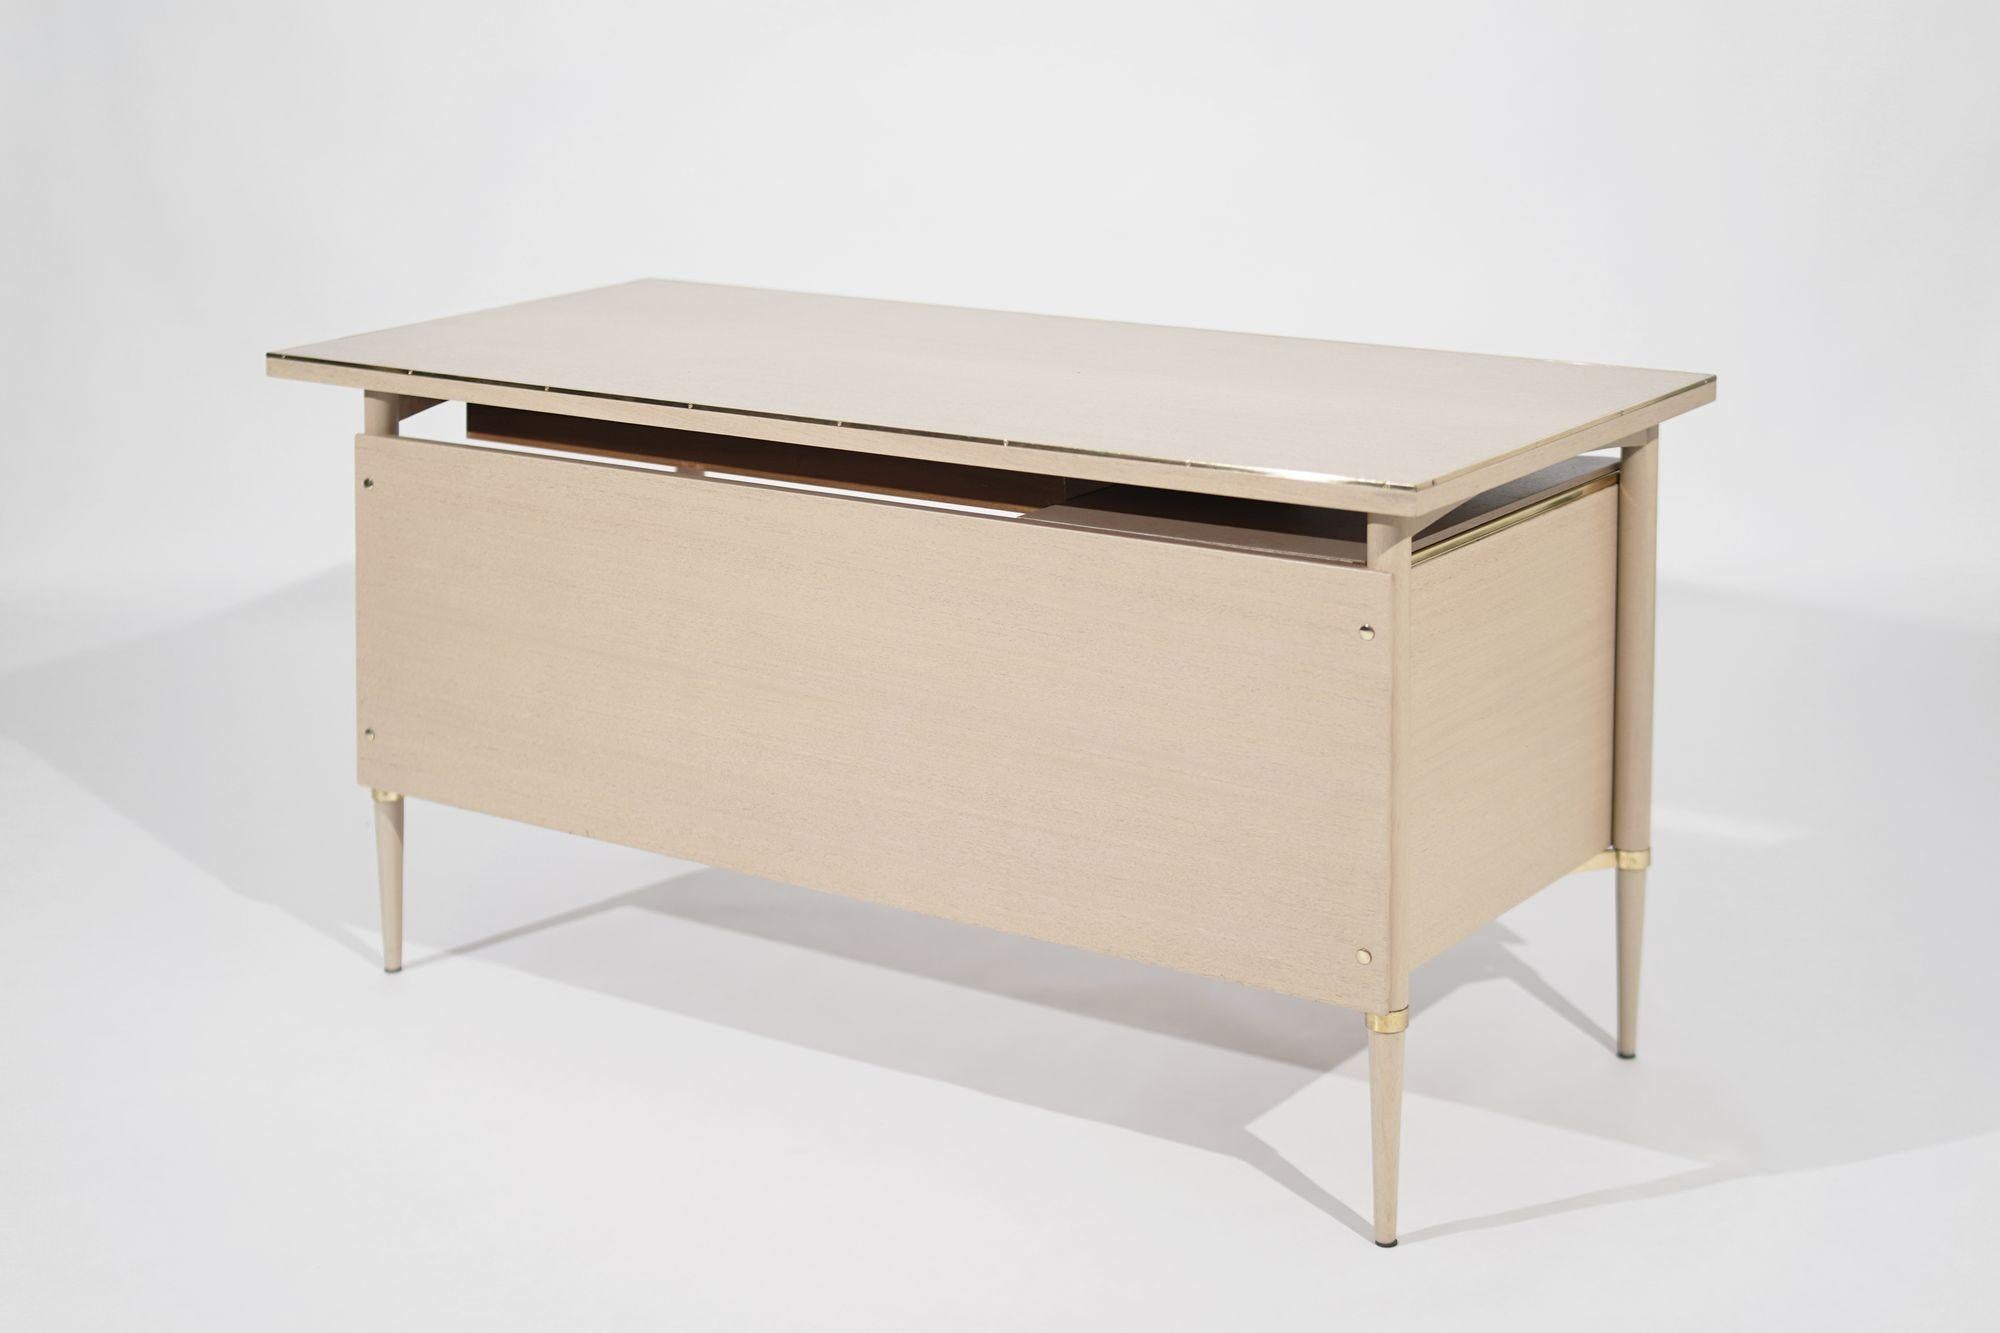 Brass Bleached Mahogany Desk by Paul McCobb, Connoisseur Collection, C. 1950s For Sale